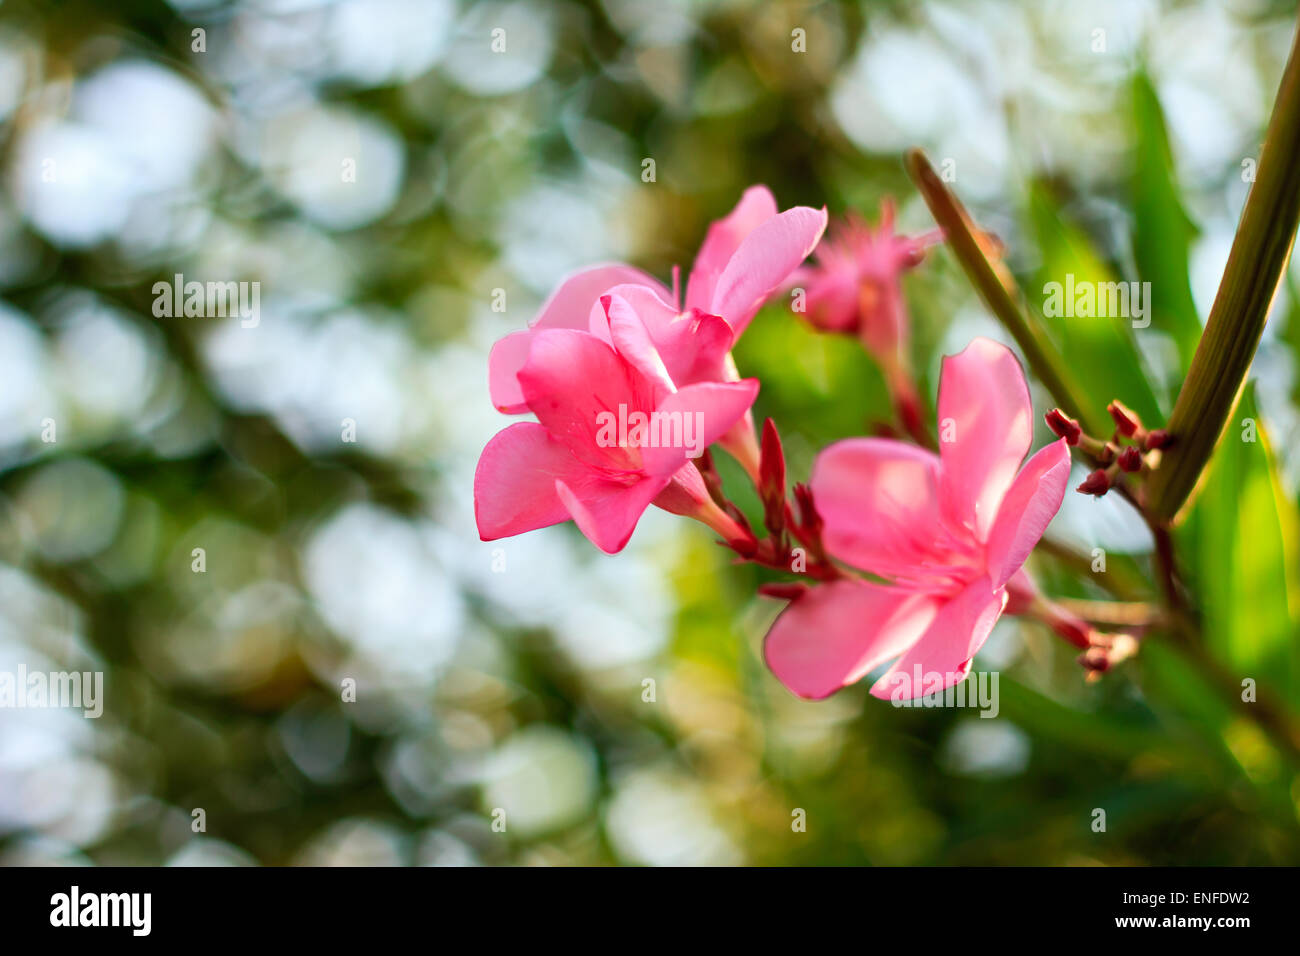 Beautiful pink flower in the nature garden Stock Photo